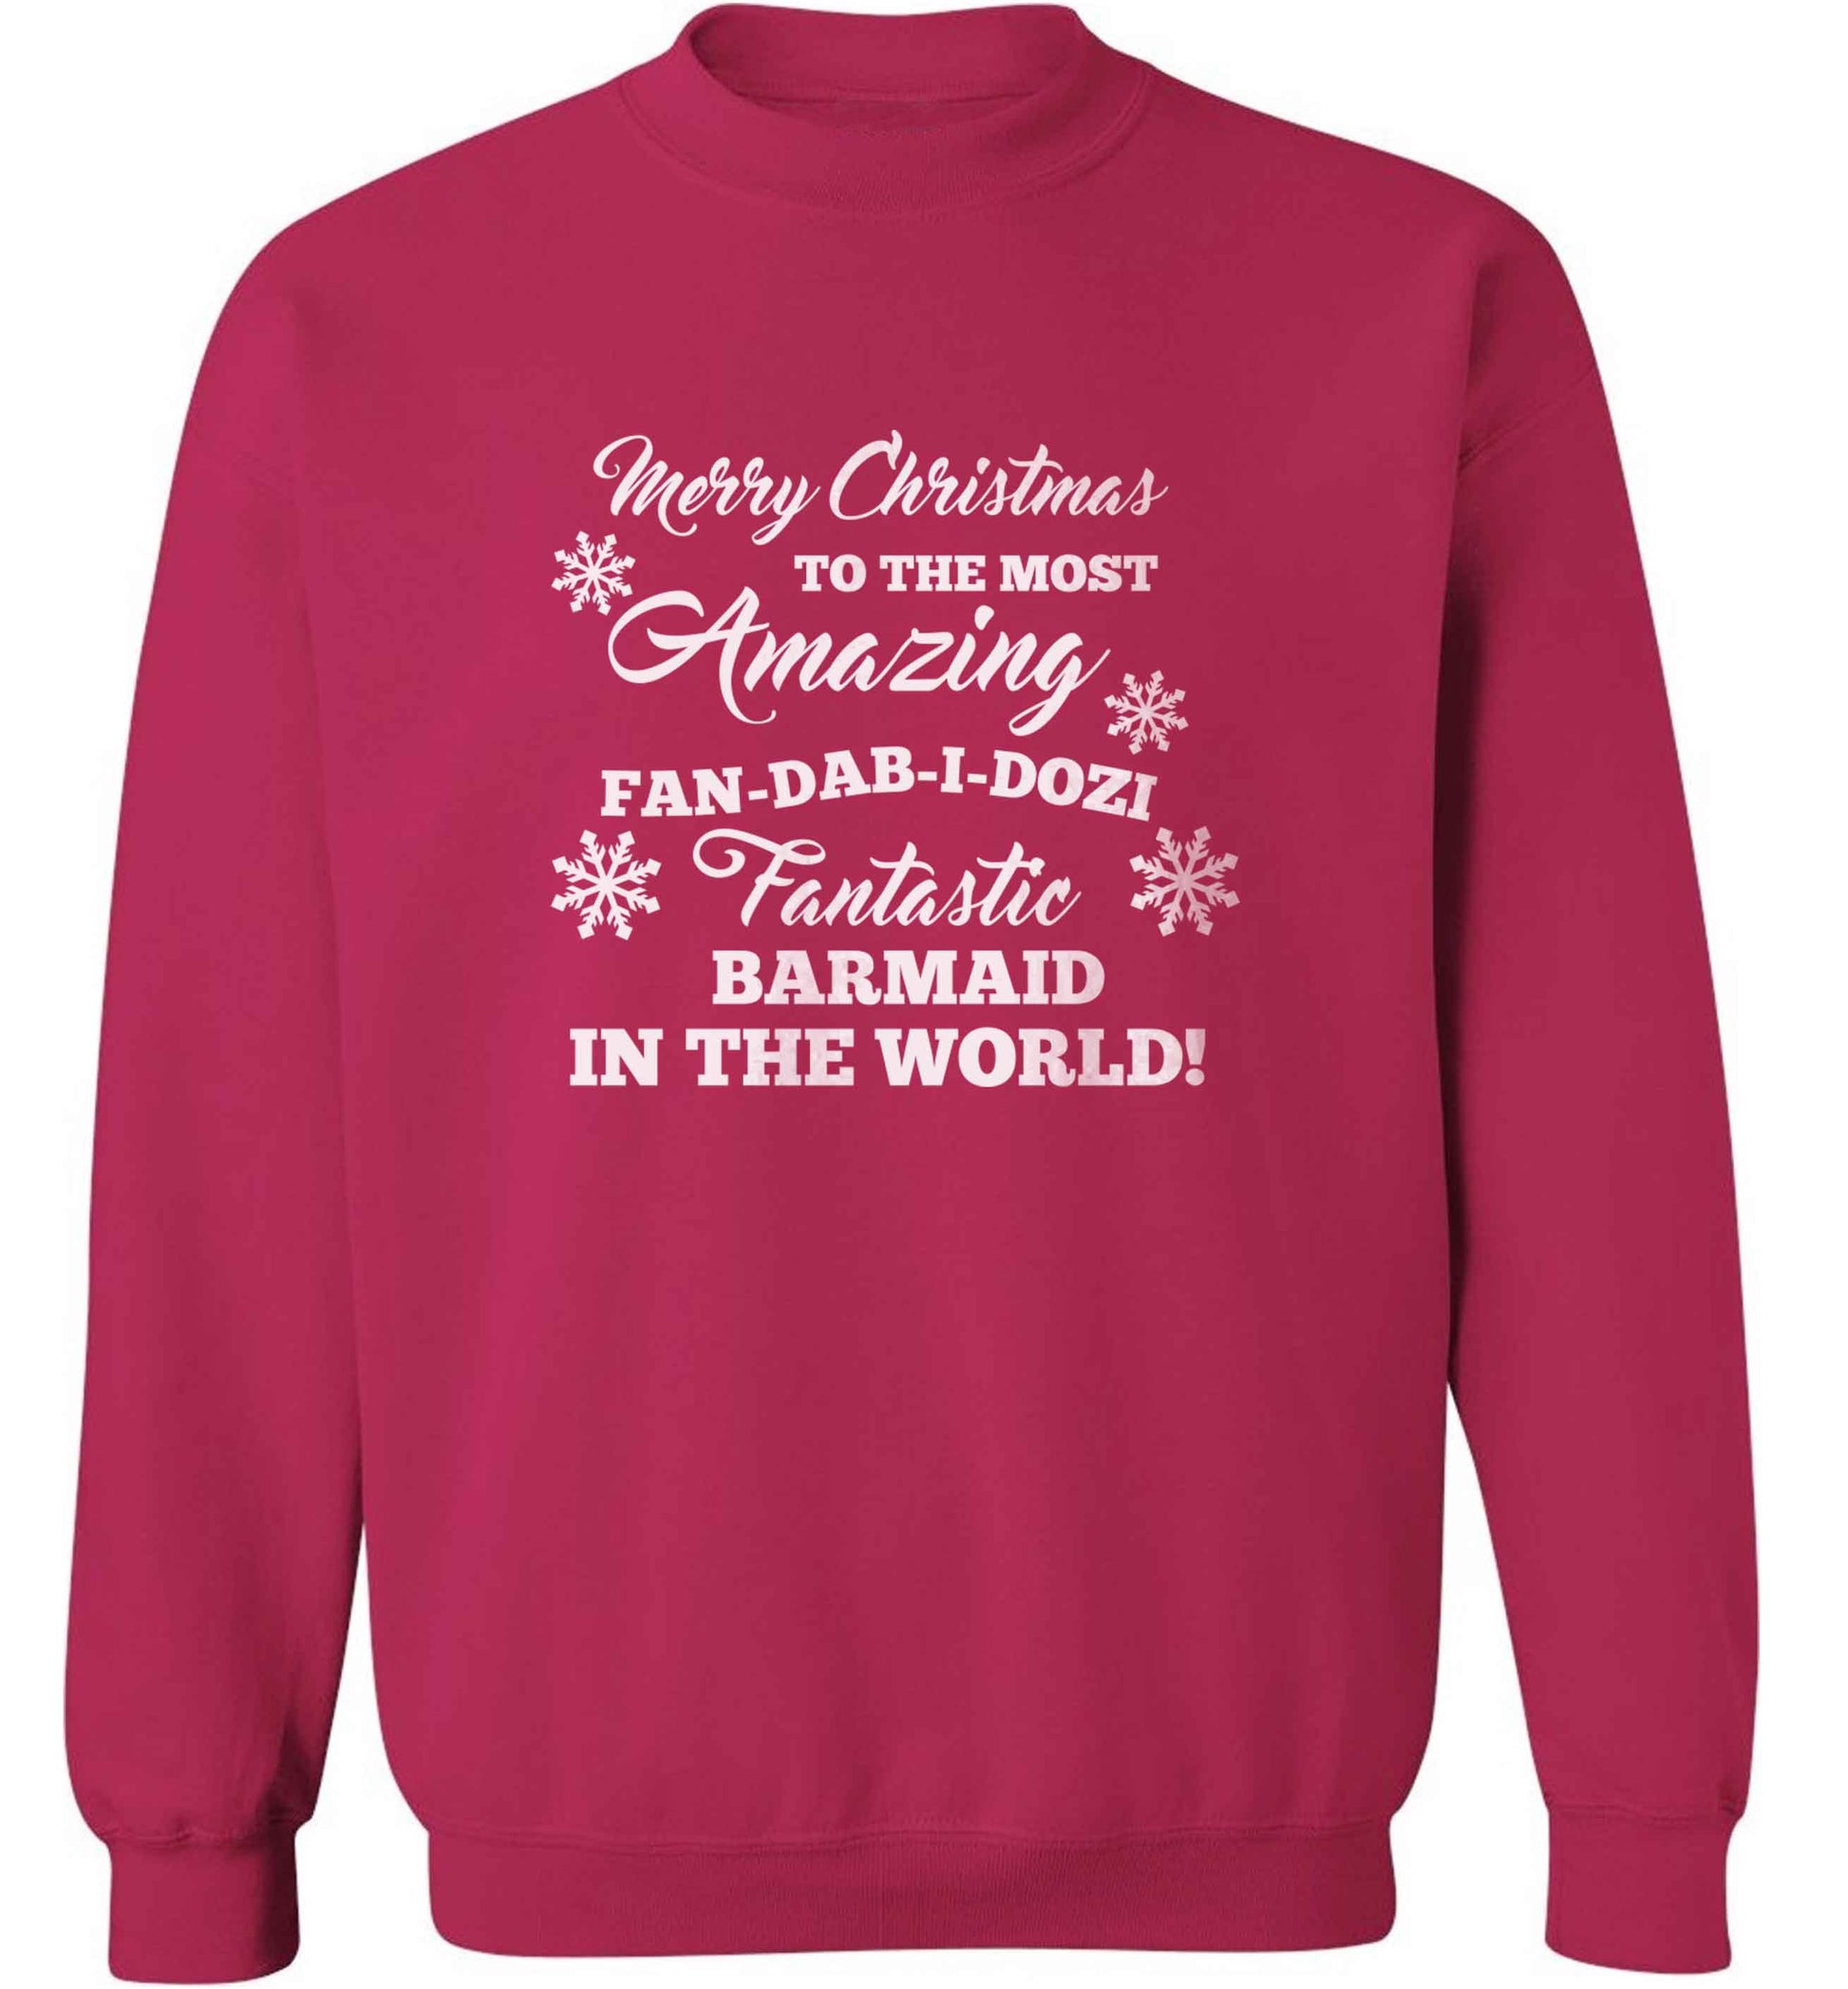 Merry Christmas to the most amazing barmaid in the world! adult's unisex pink sweater 2XL